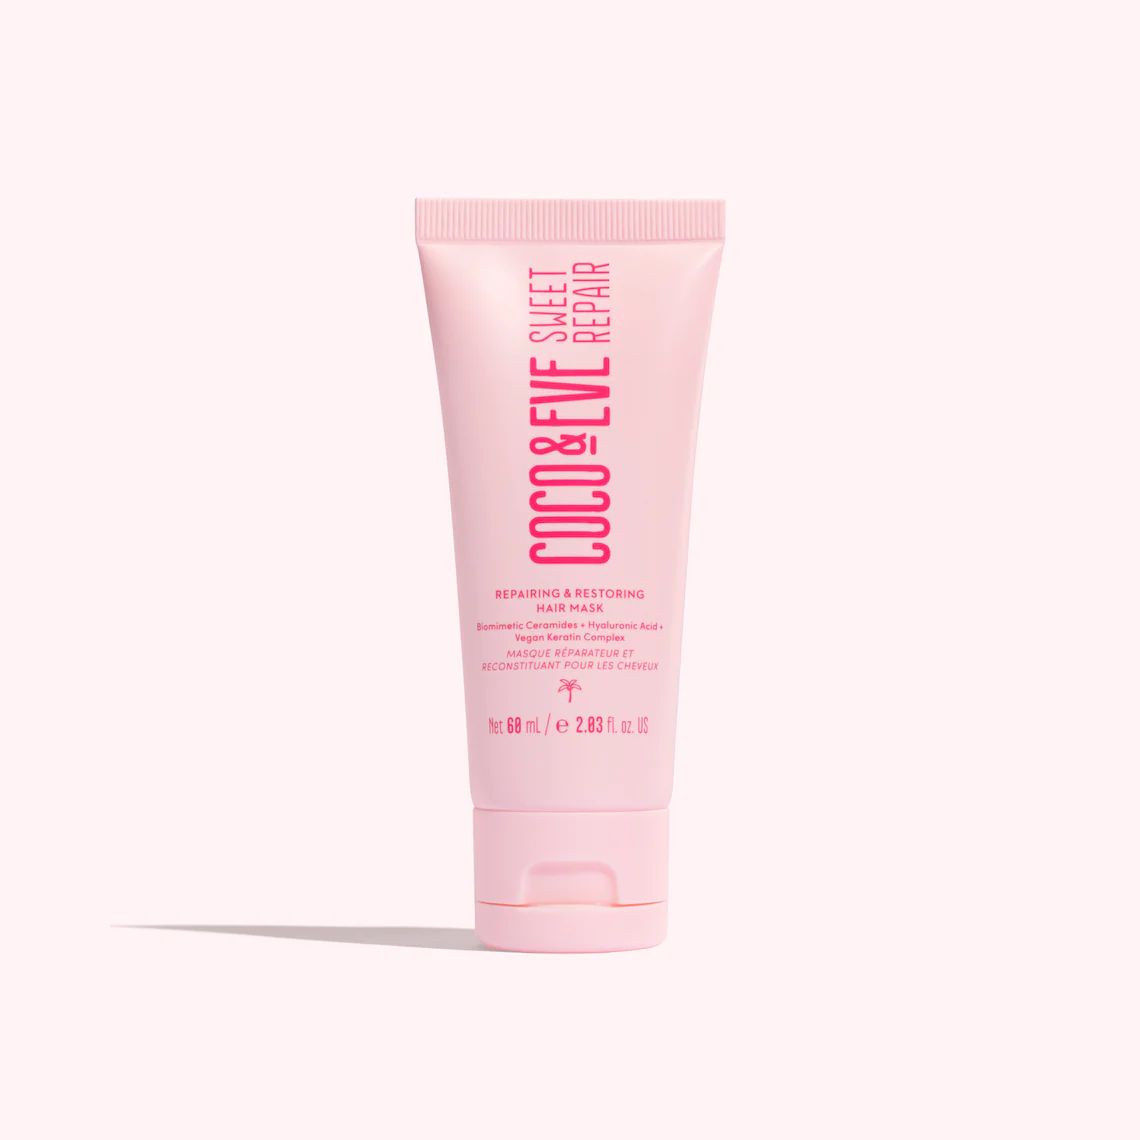 Sweet Repair Hair Mask Deluxe Travel Size | Coco&Eve